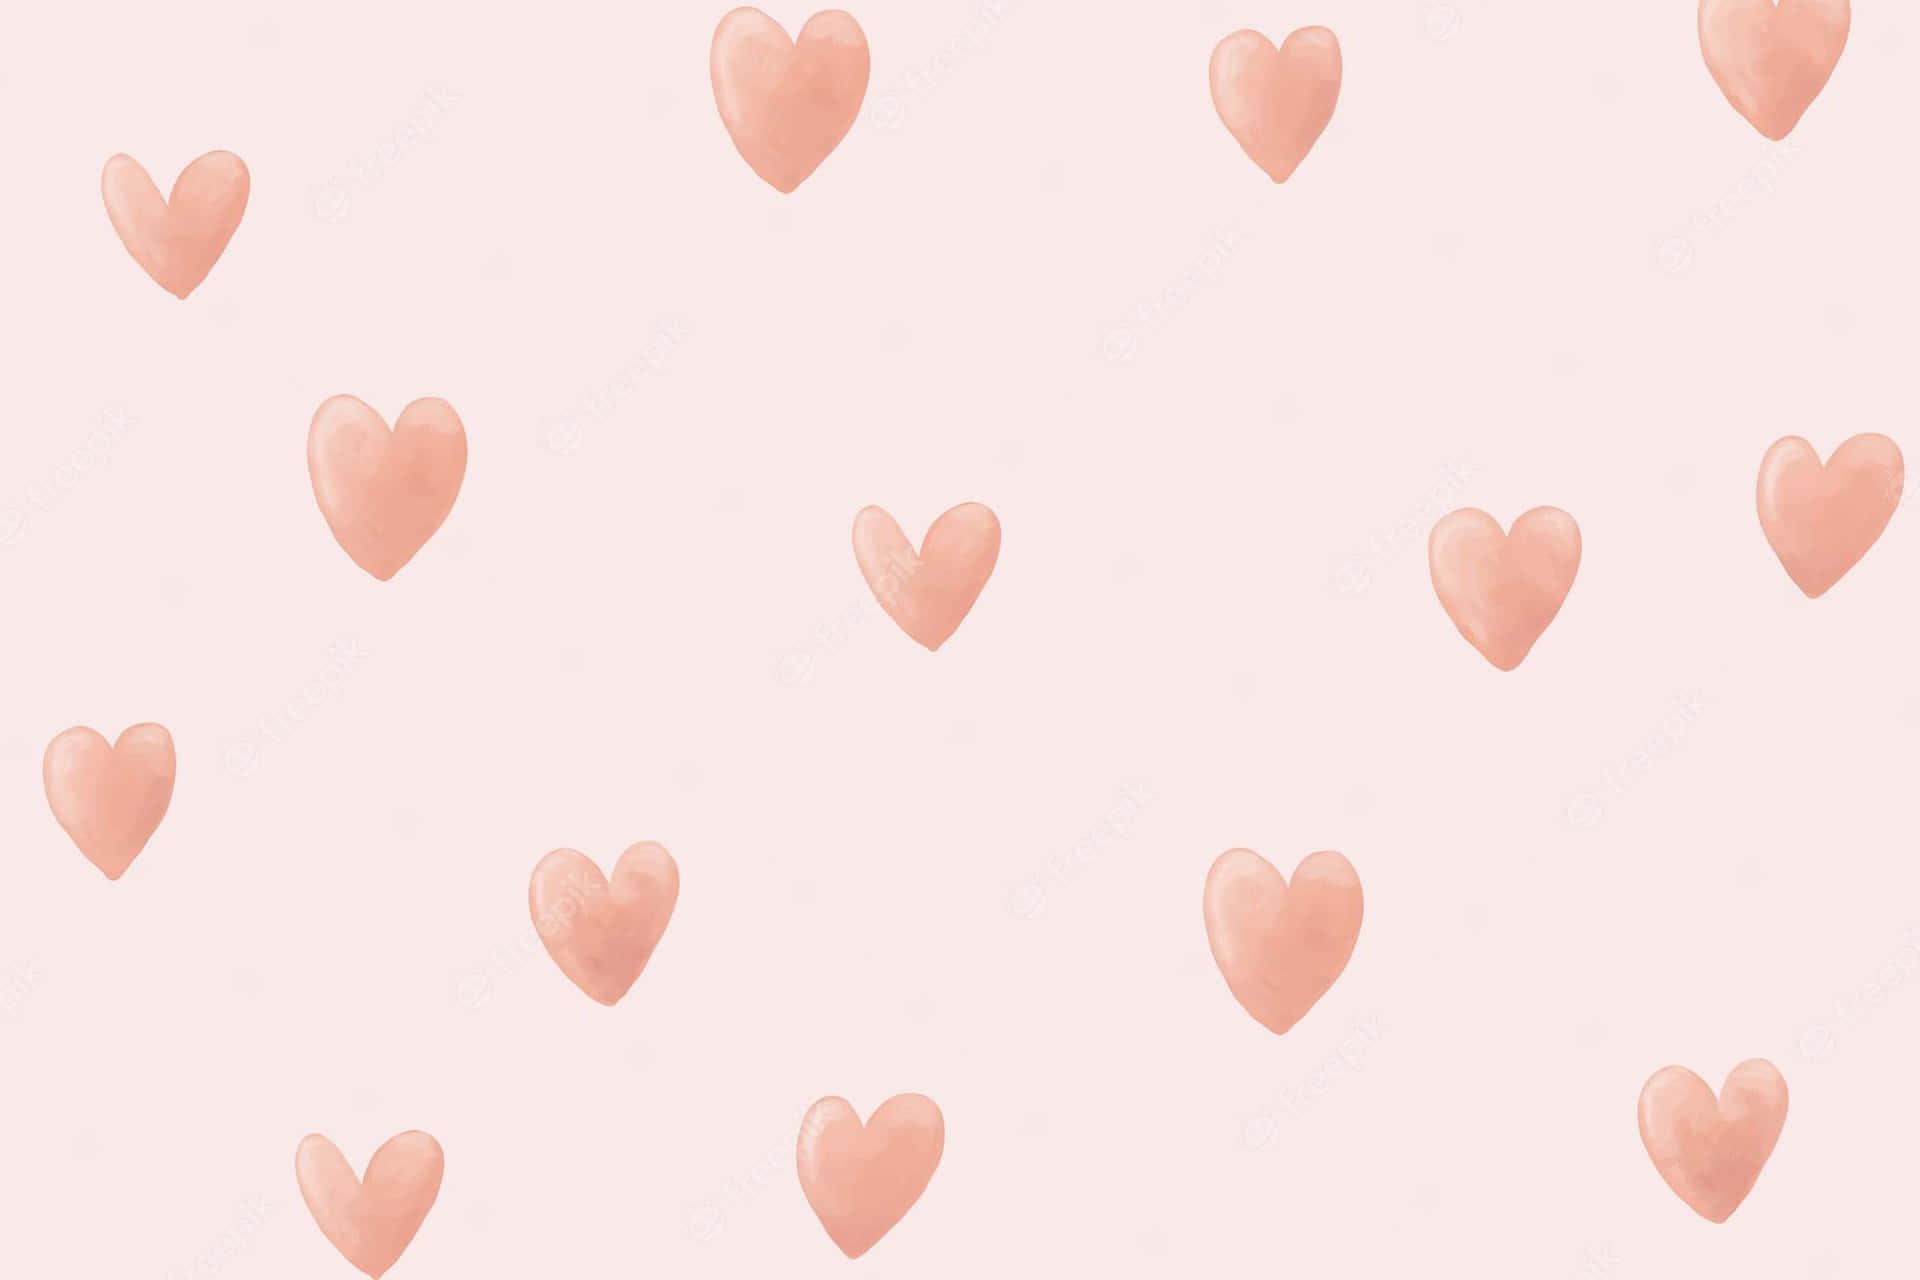 Show some love with our Cute Heart wallpaper